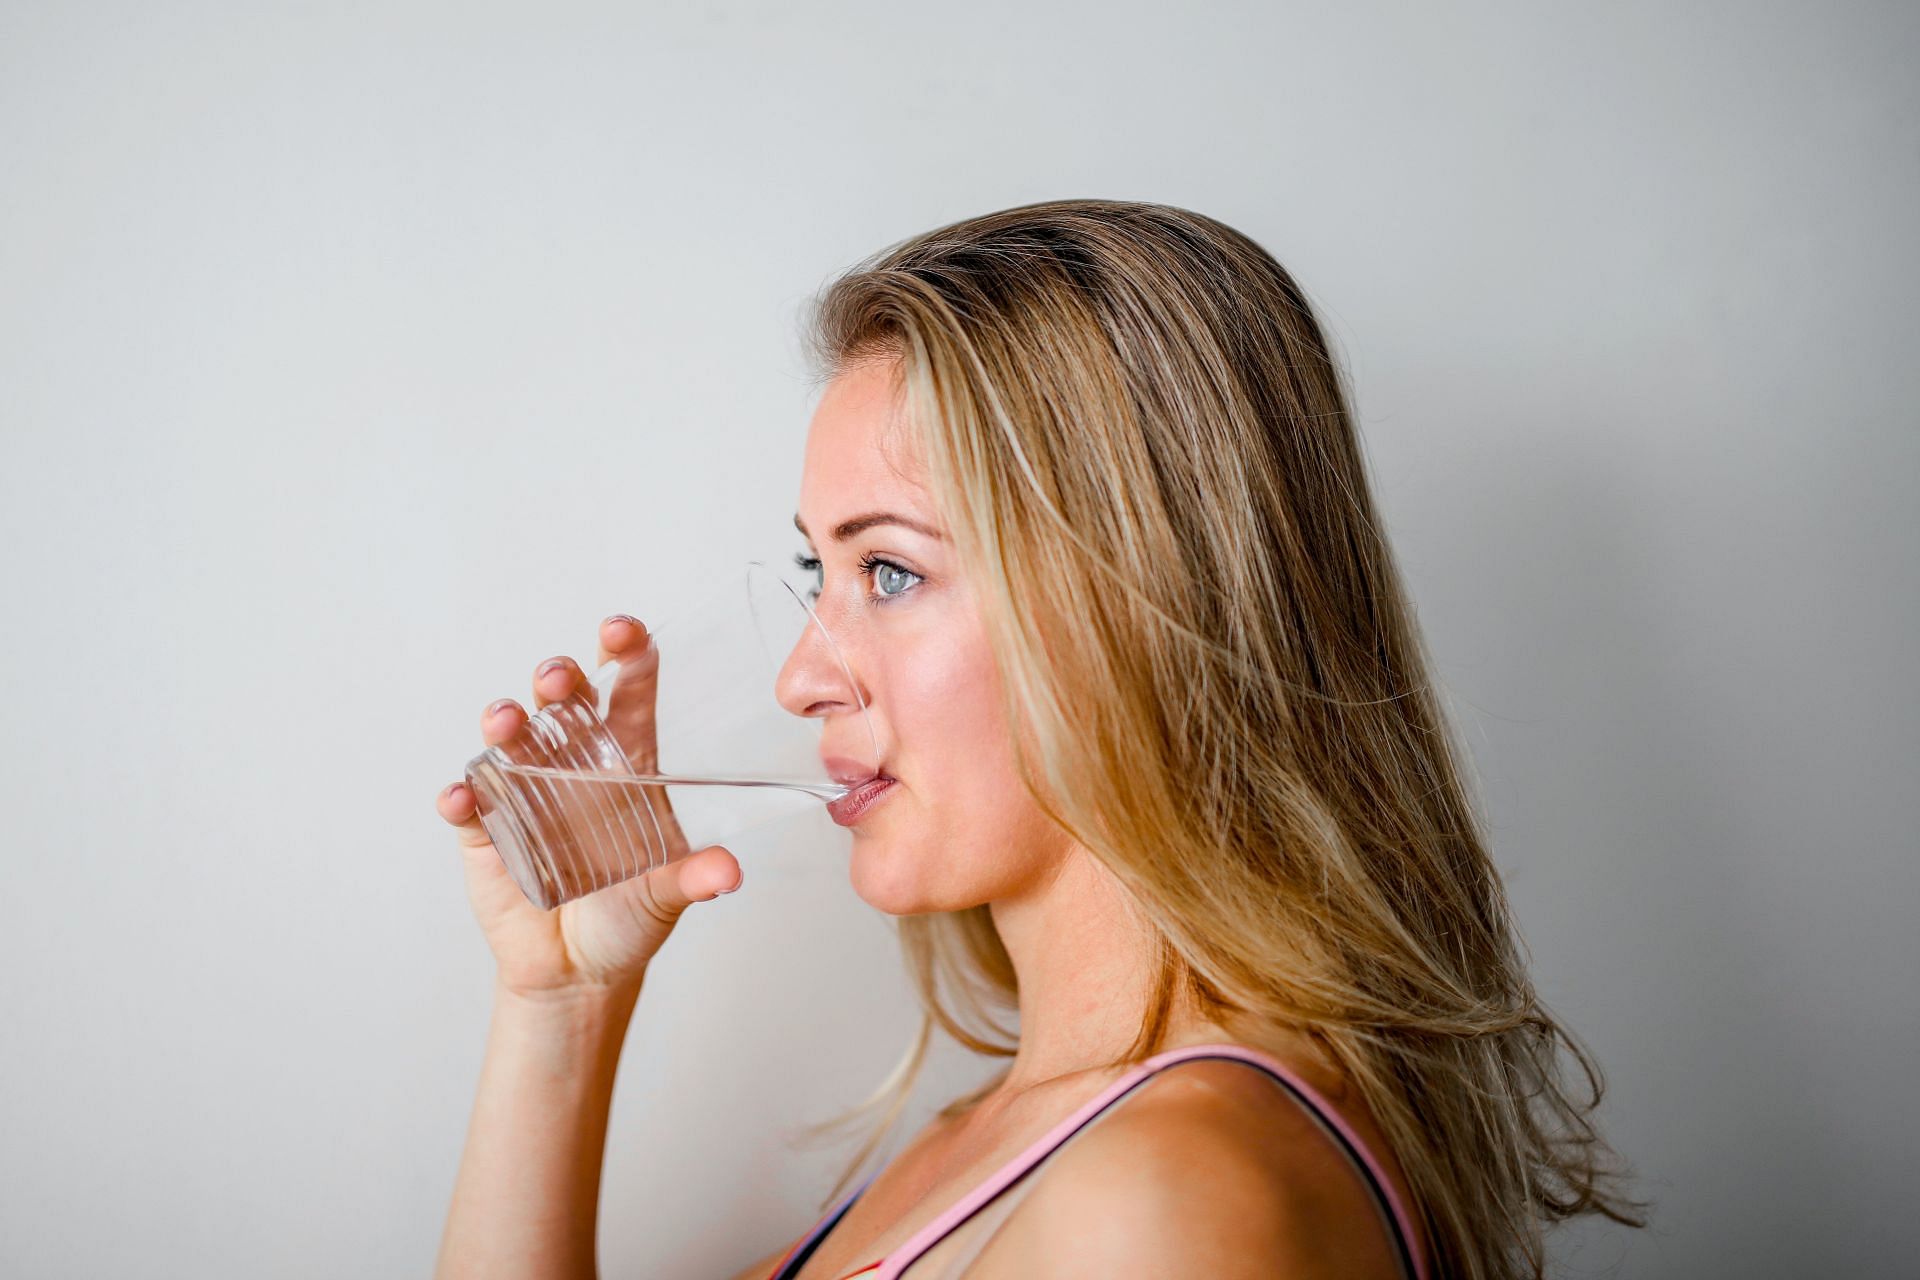 Drinking water in moderation is the key. (Image via Pexels/ Andrea Piacquadio)